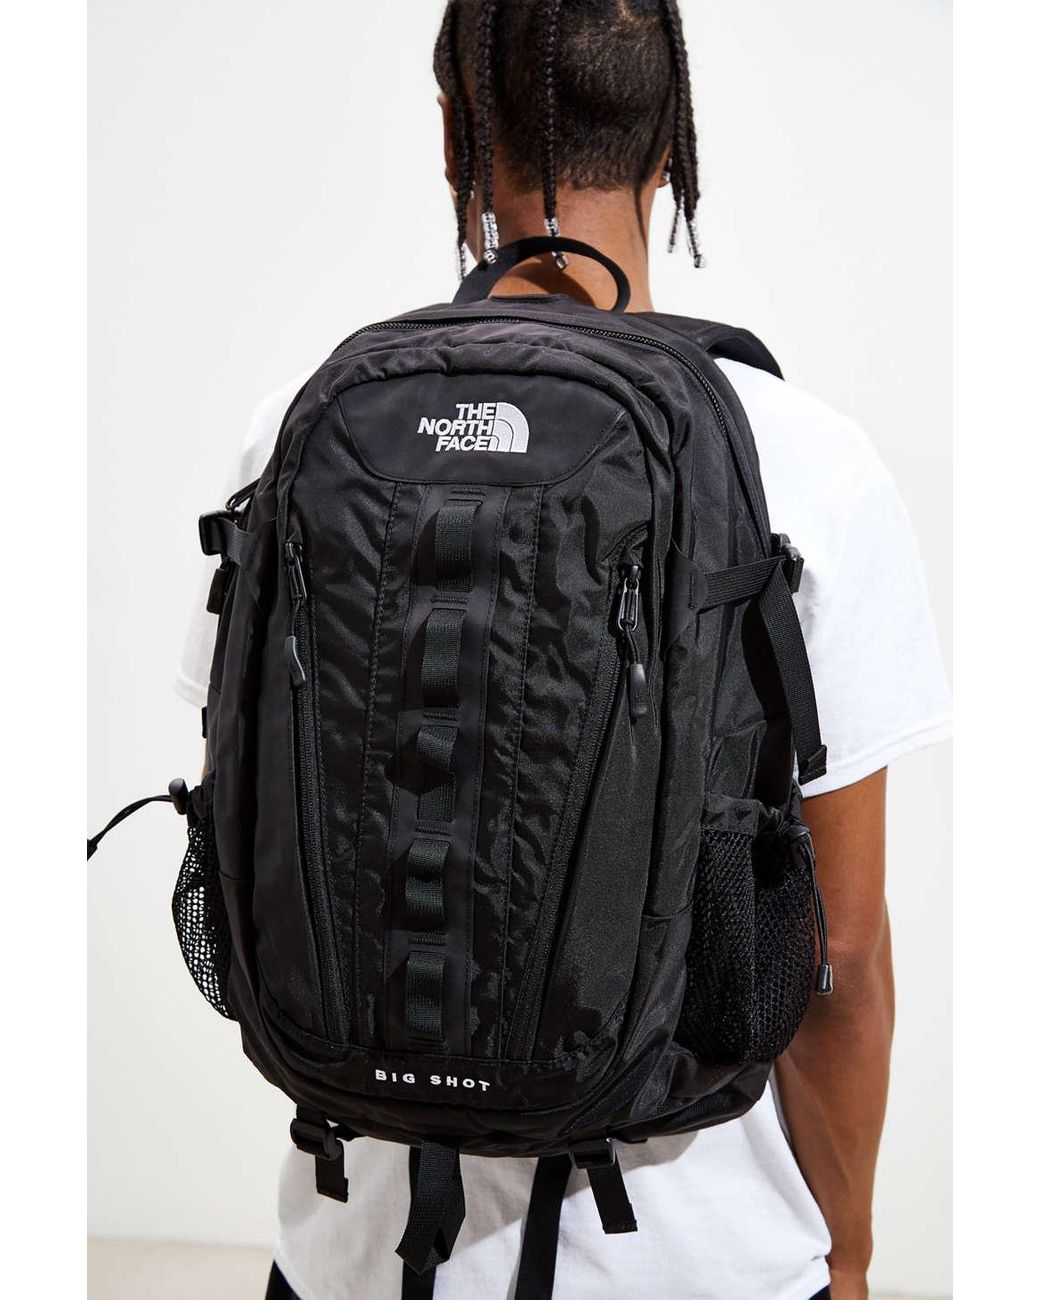 The North Face The North Face Big Shot Ii Backpack in Black for